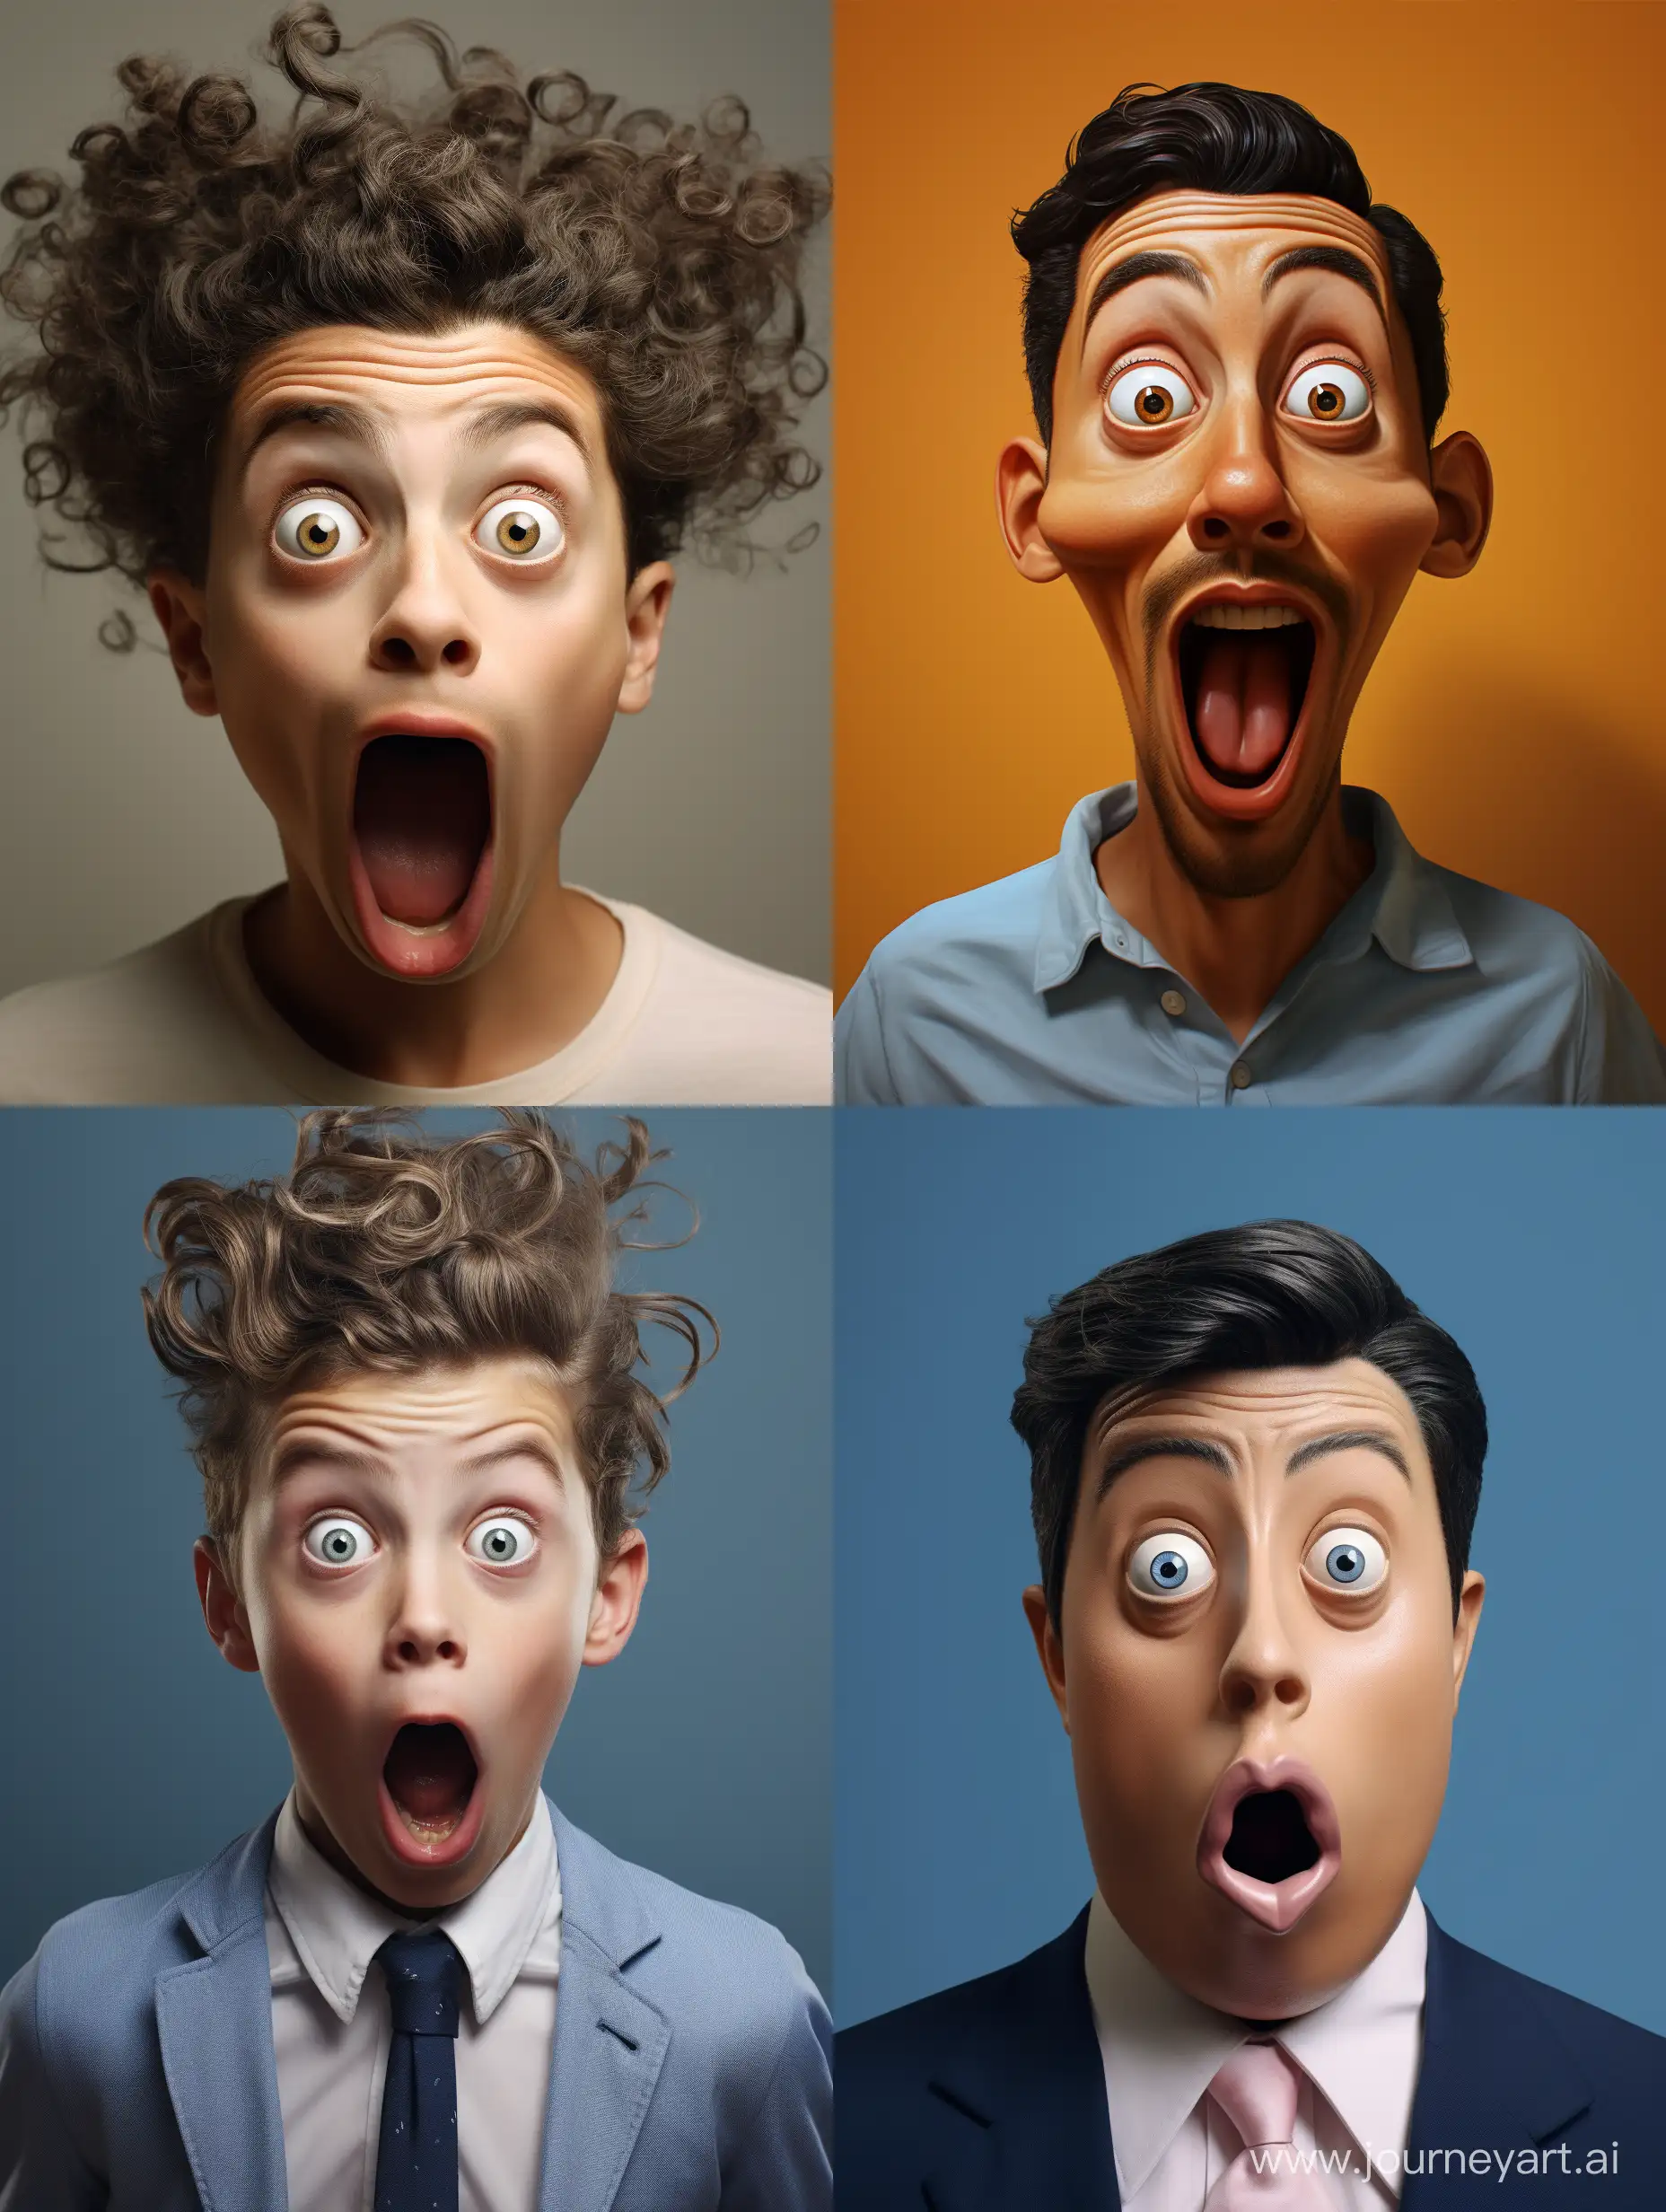 Playful-and-Whimsical-Silly-Funny-Face-Expression-Art